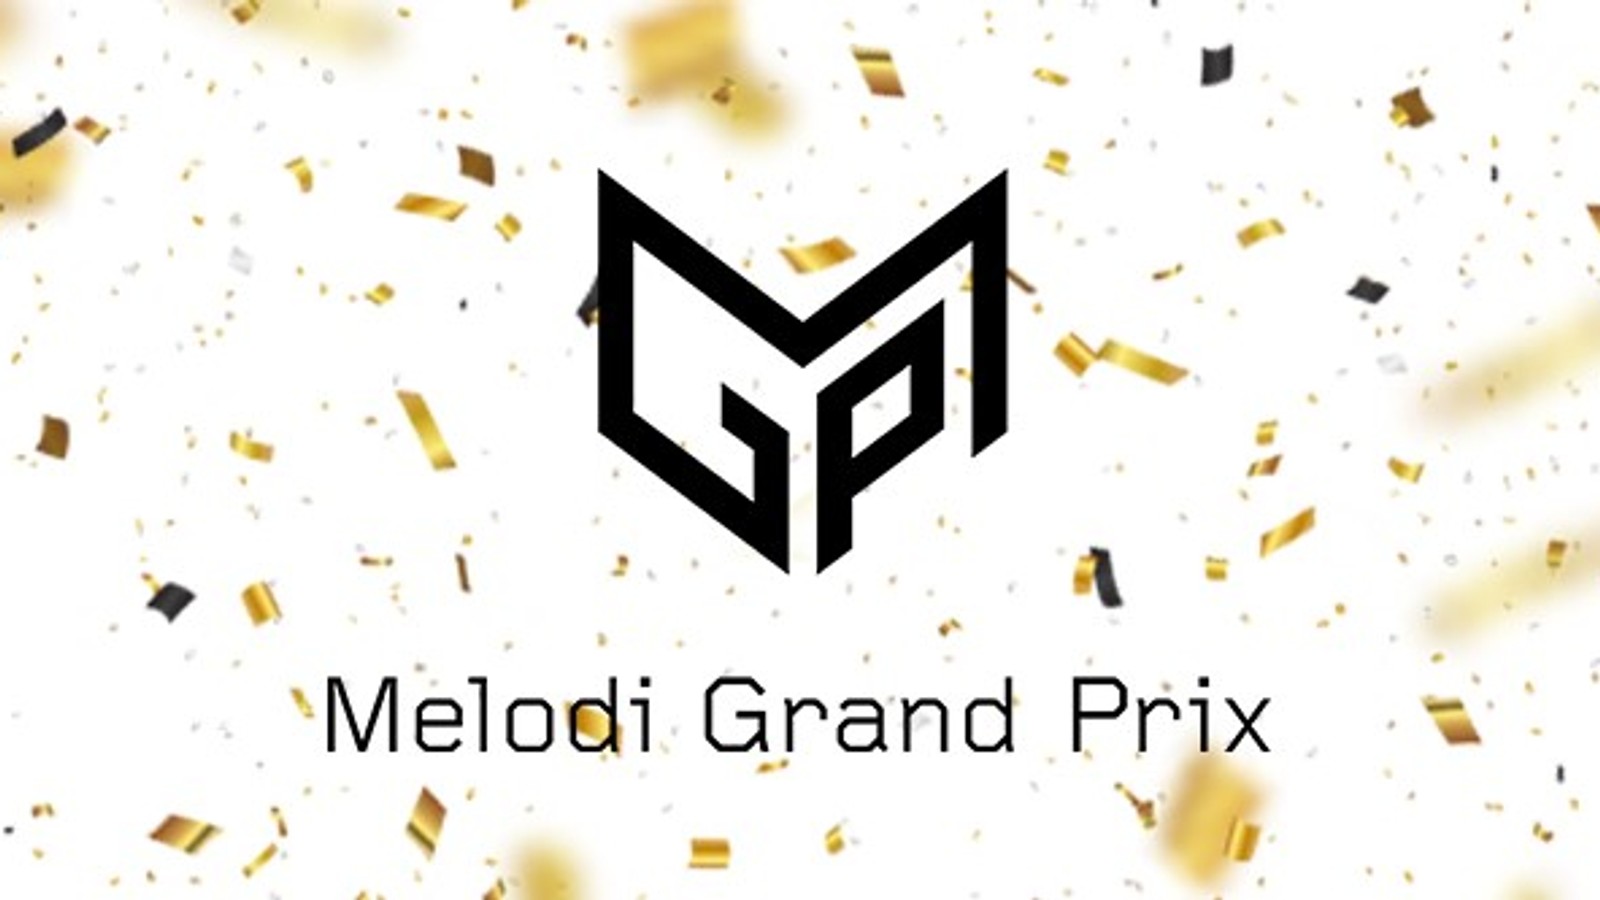 Norway: Expanded Melodi Grand Prix to return for 2021